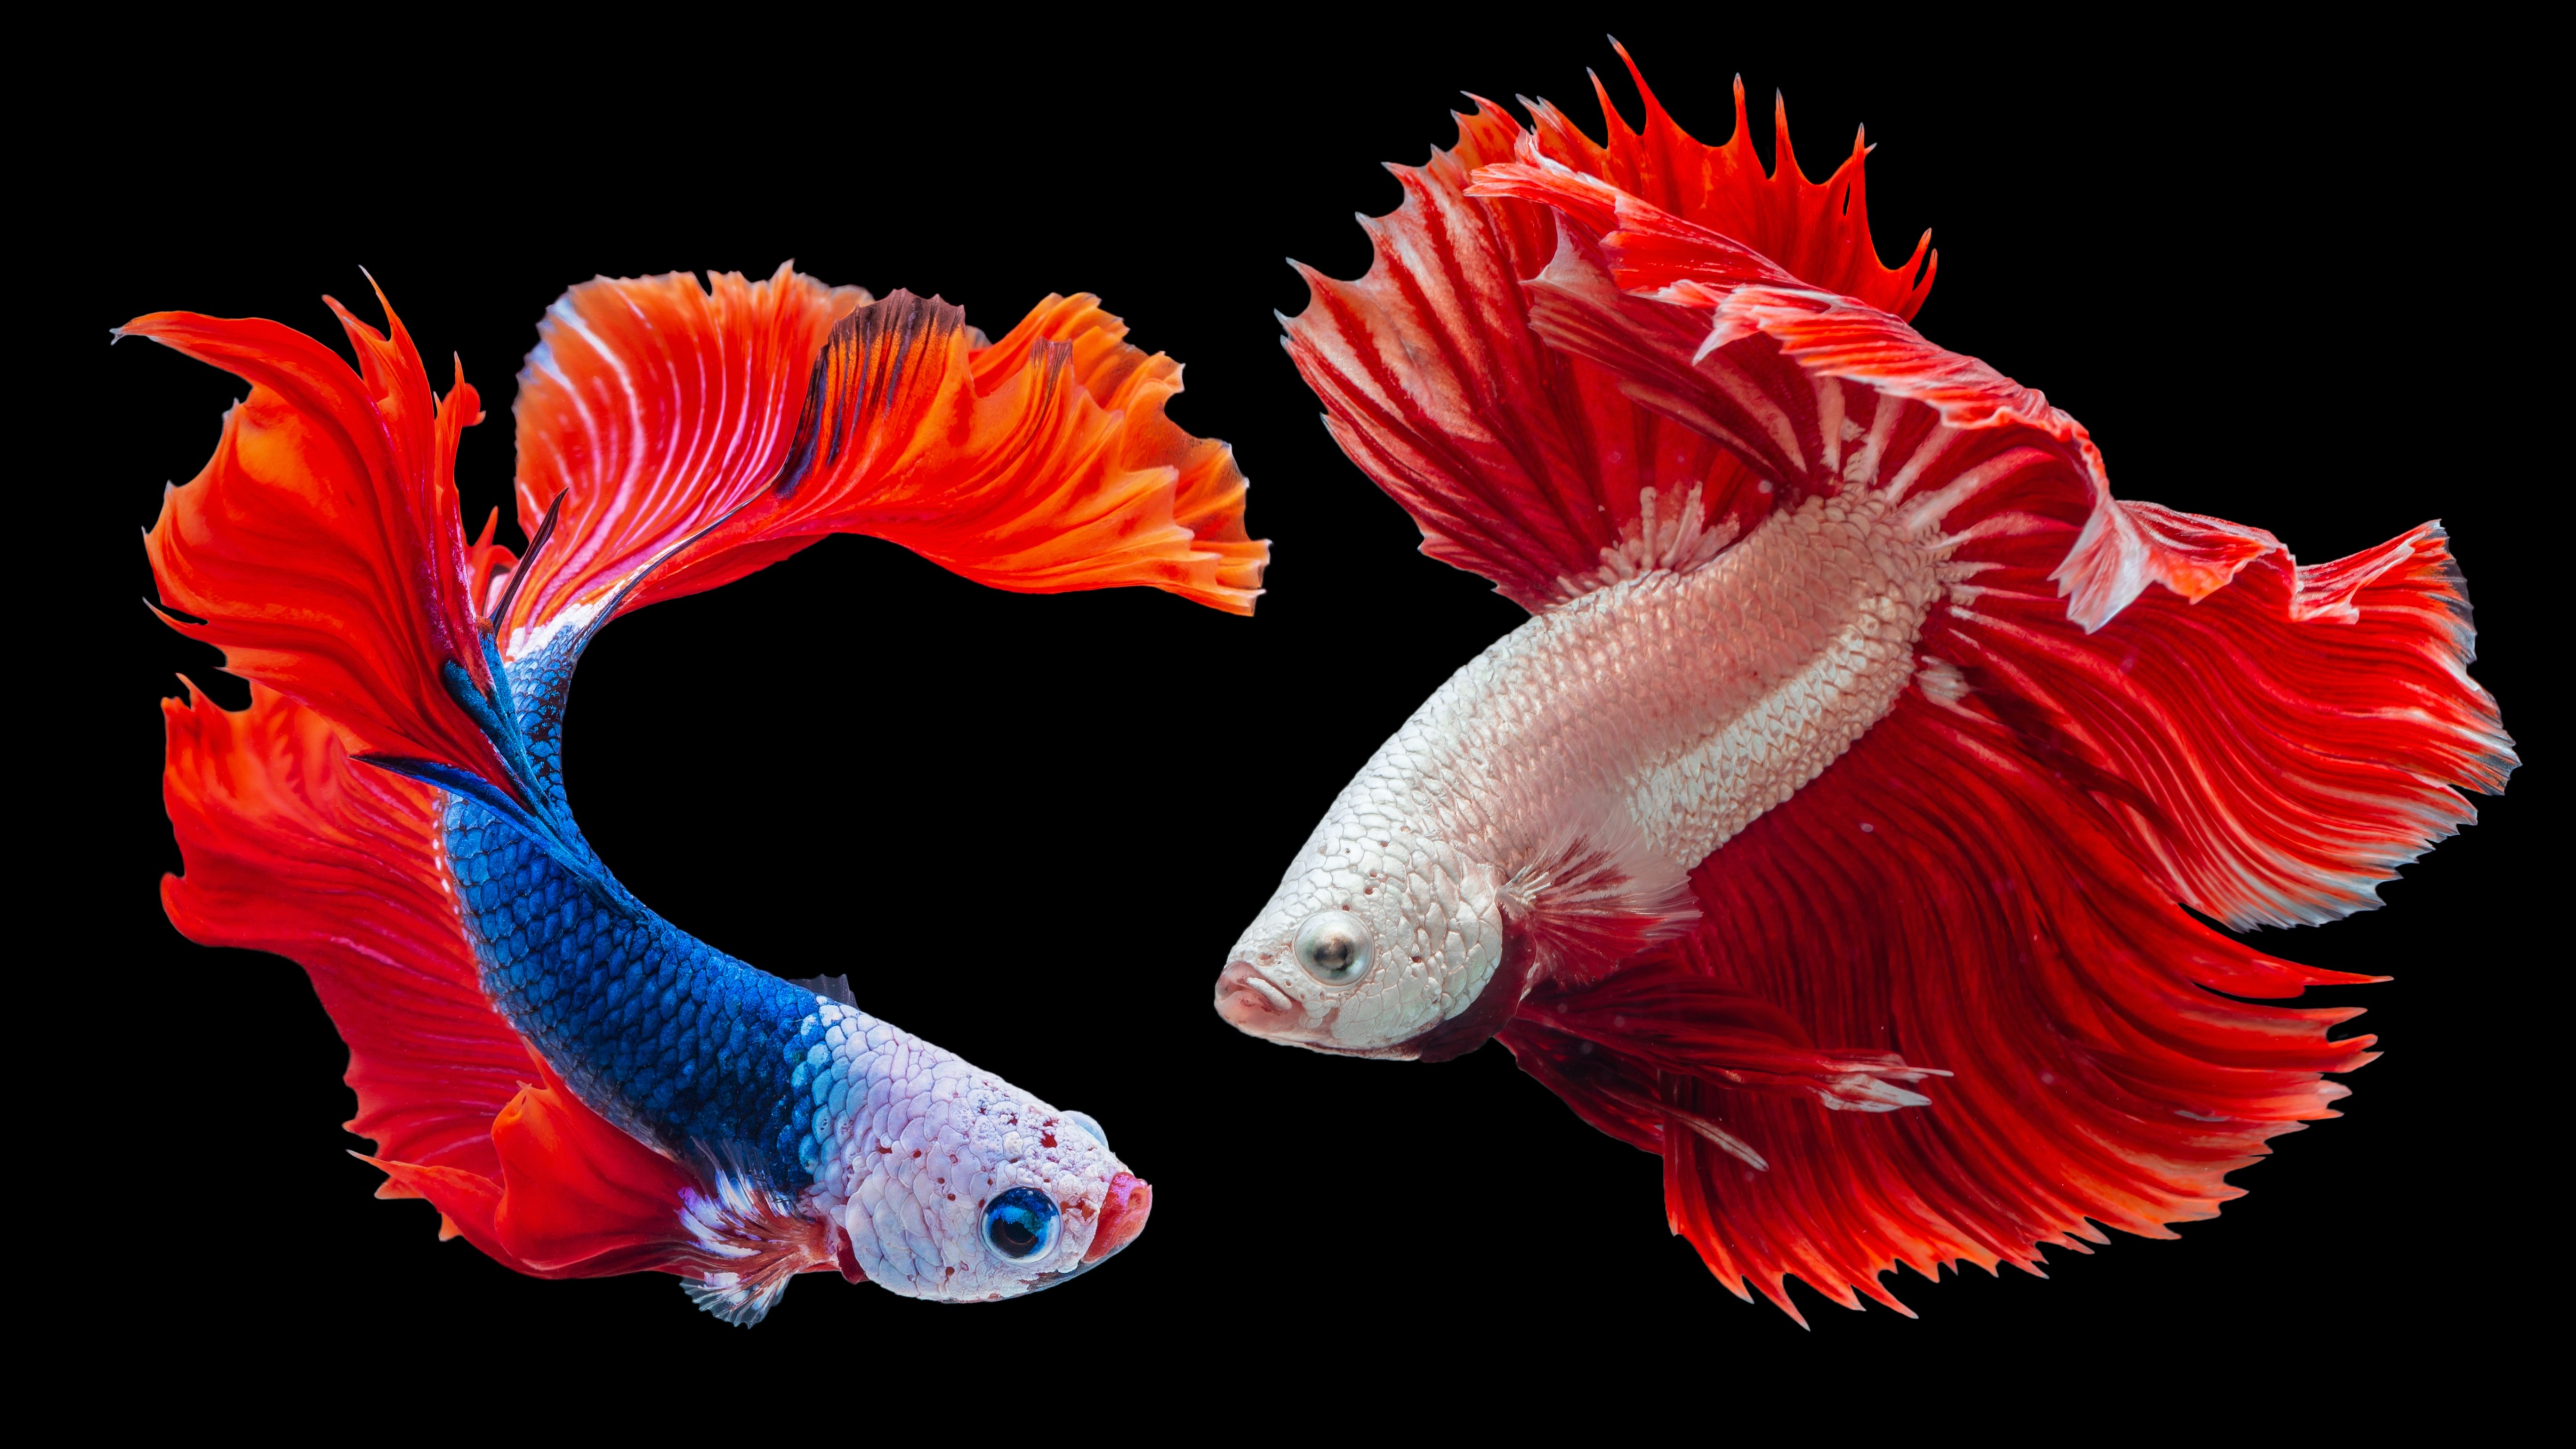 Colorful Pictures Of Fish